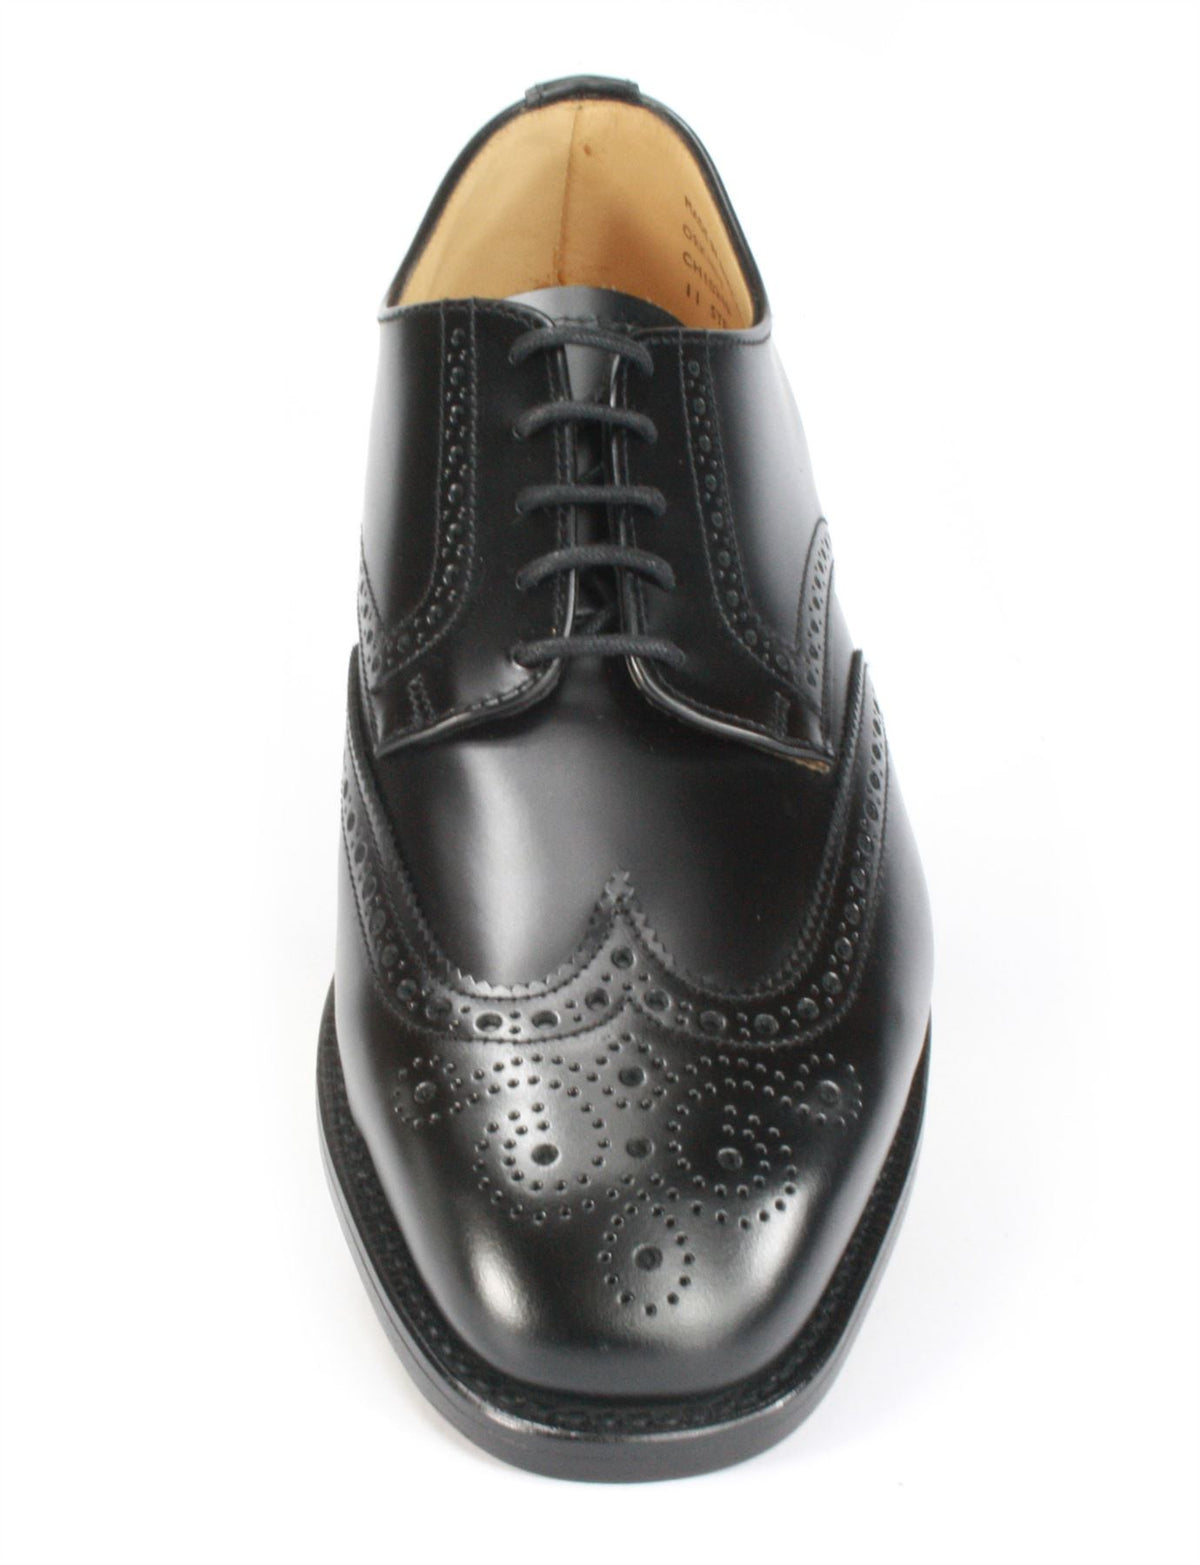 Charles Horrel England CH1024 Welted Wingtip Mens Brogue Leather Sole Shoes